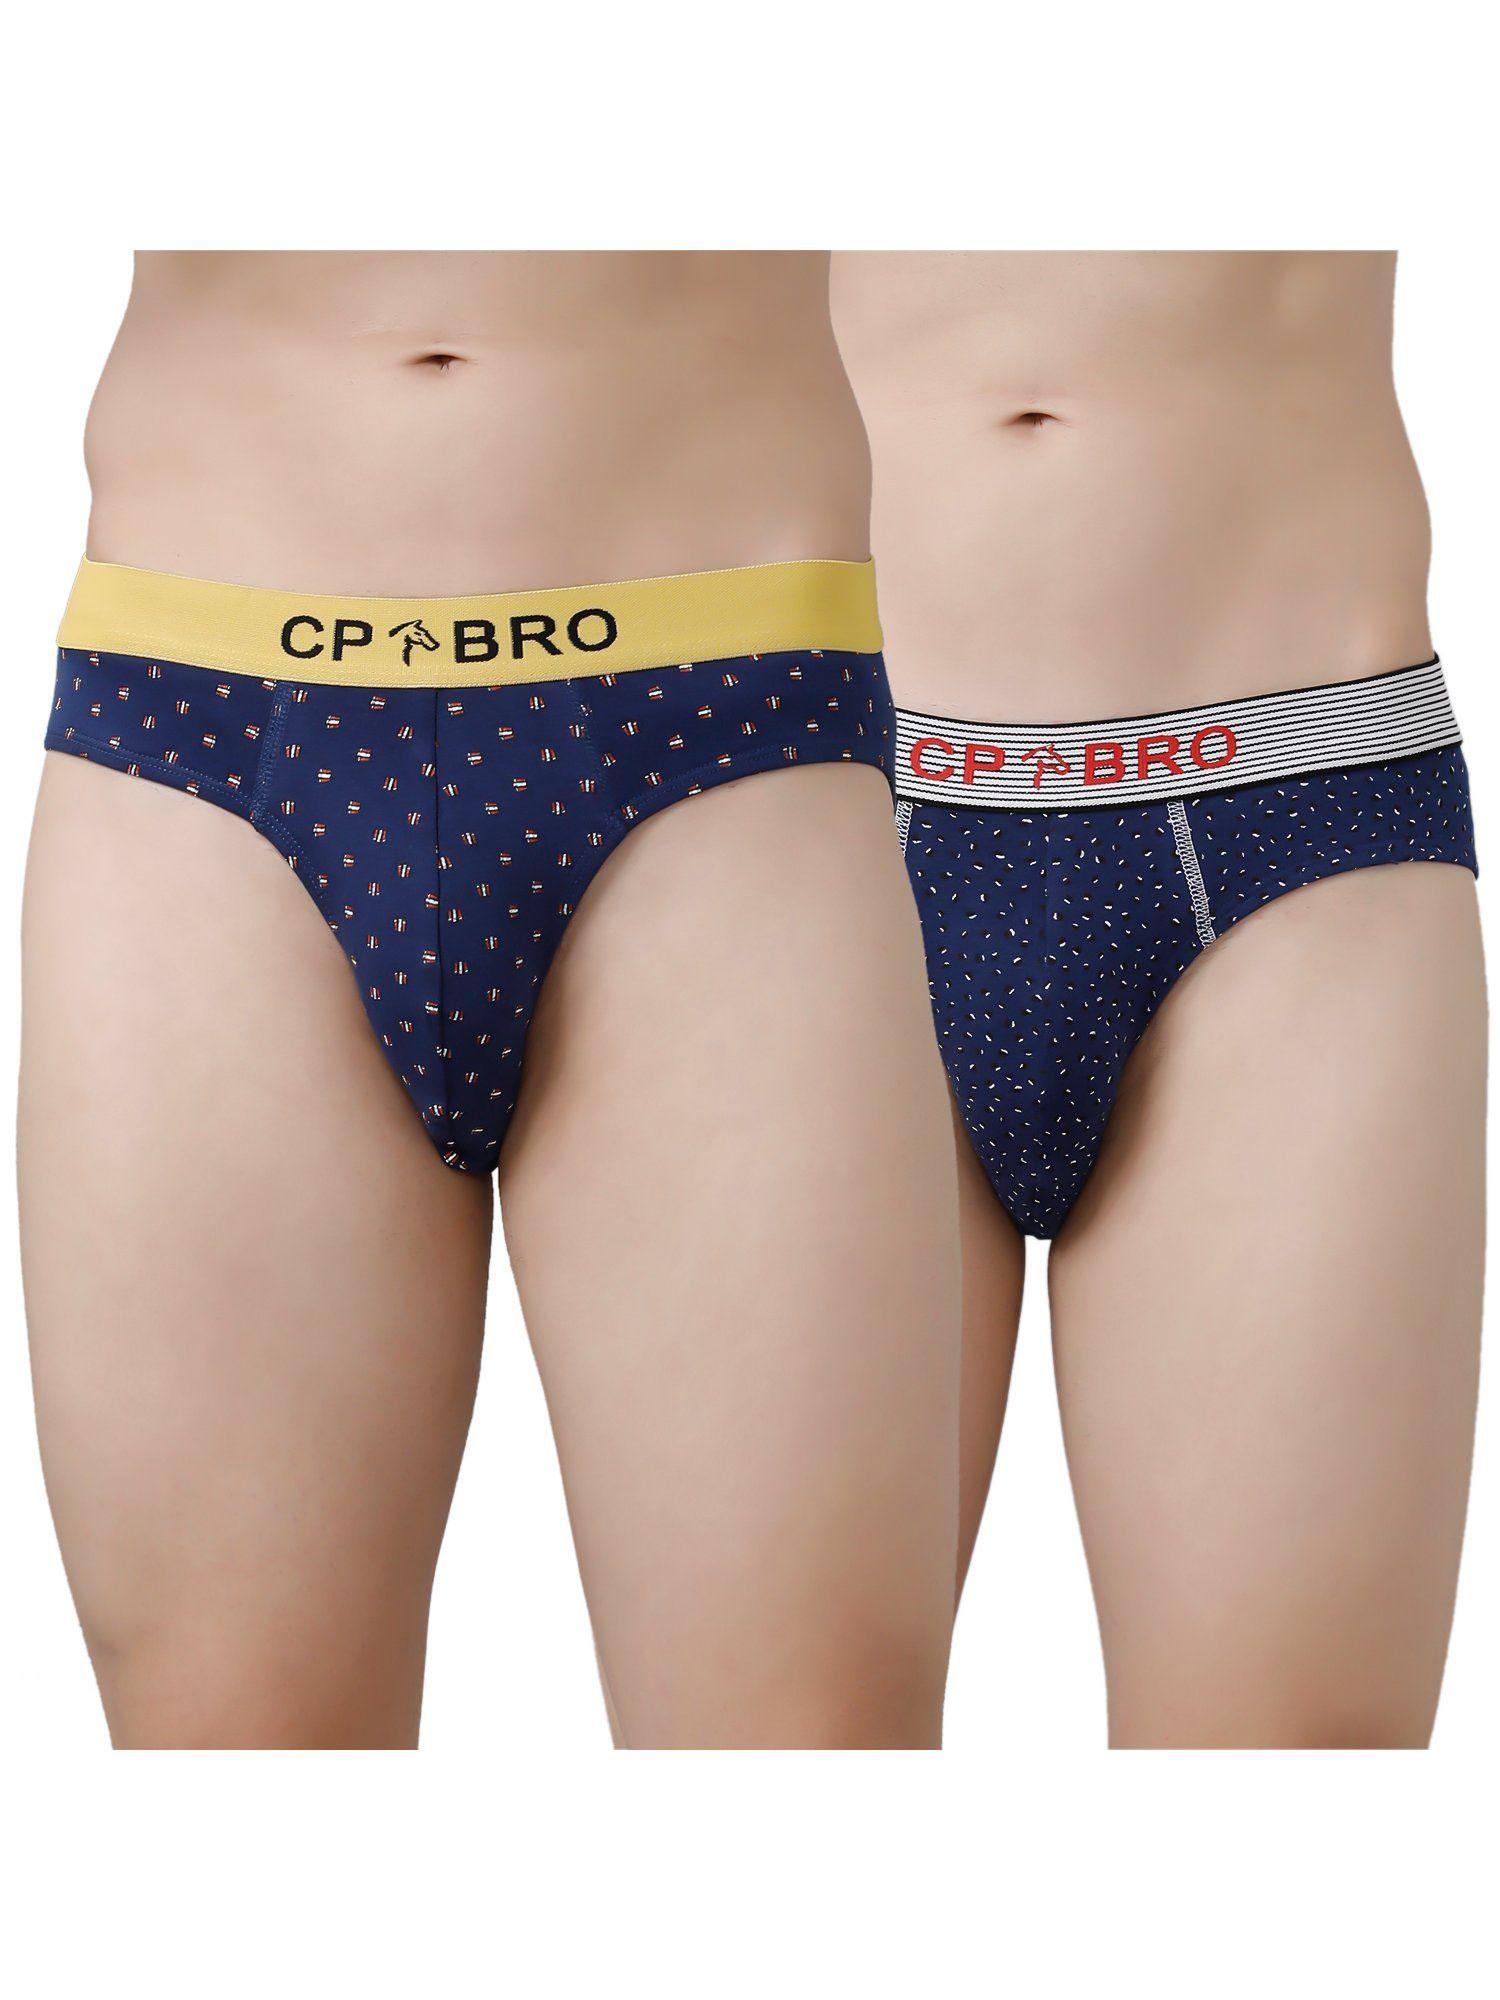 printed briefs with exposed waistband value - navy & navy dot (pack of 2)